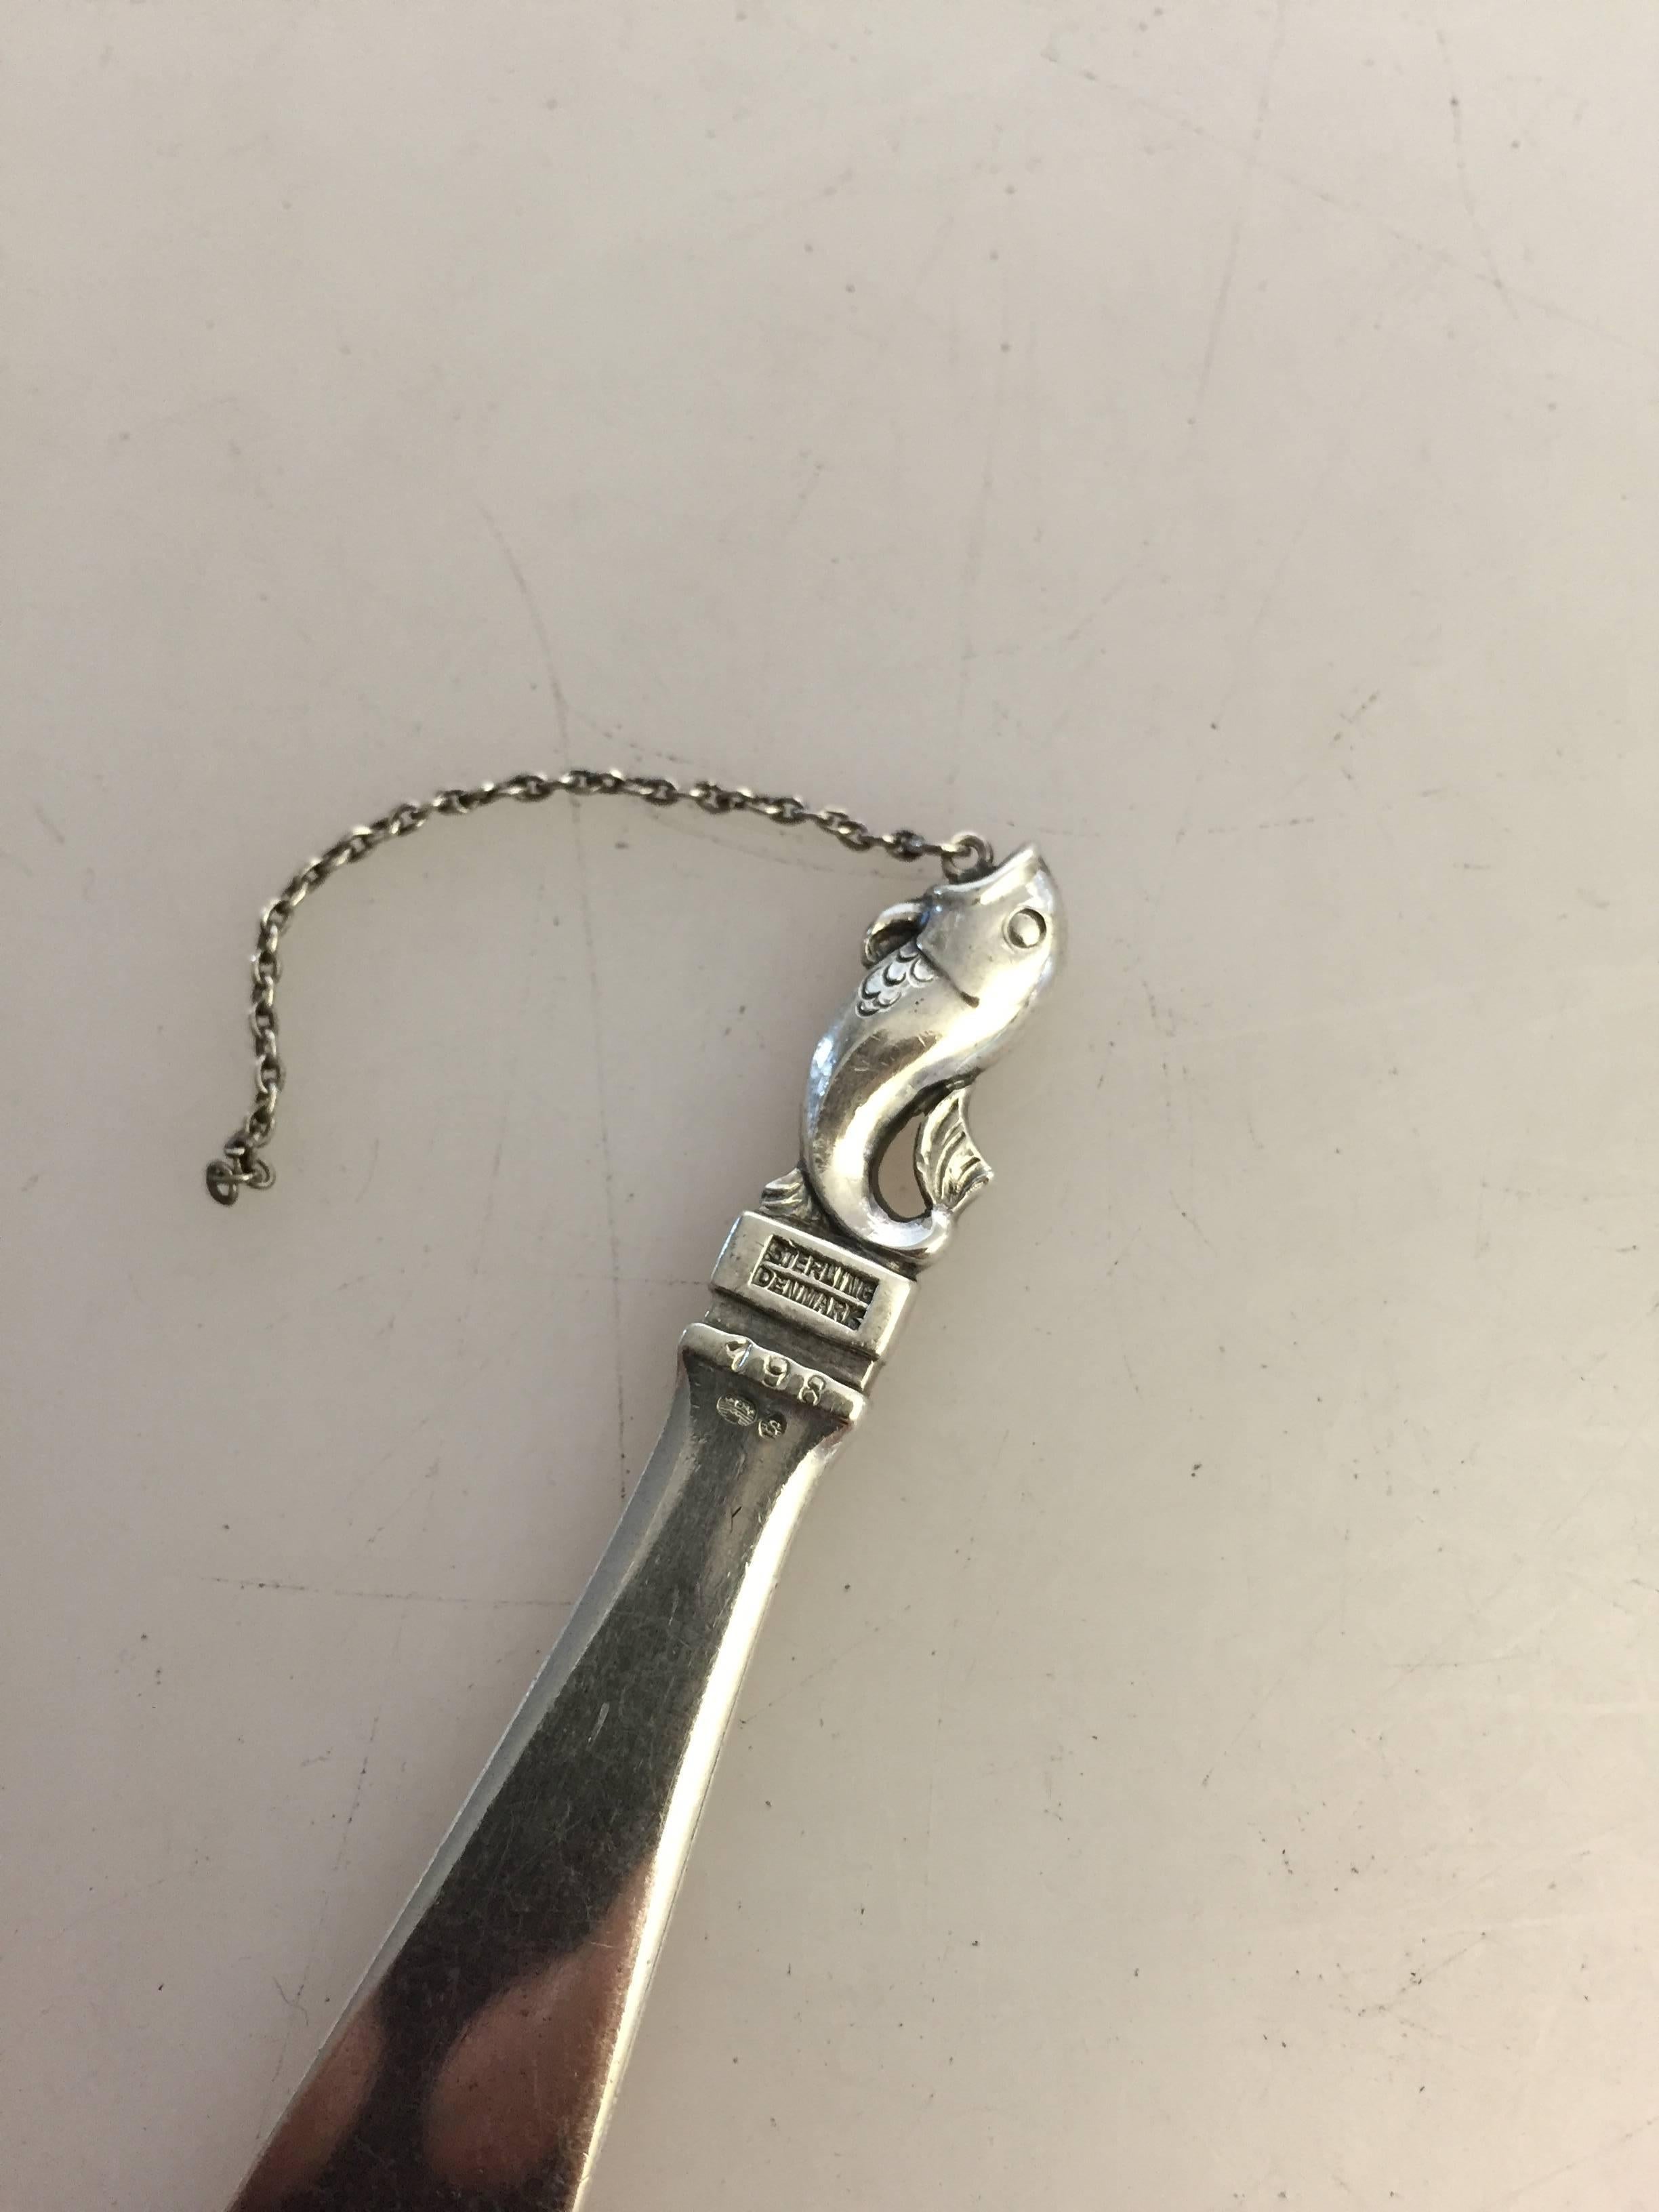 Georg Jensen sterling silver letter opener #198 with fish ornament. From 1933-1944.

Measures: 11.7 cm L.
Weighs 21 g / 0.80 oz.